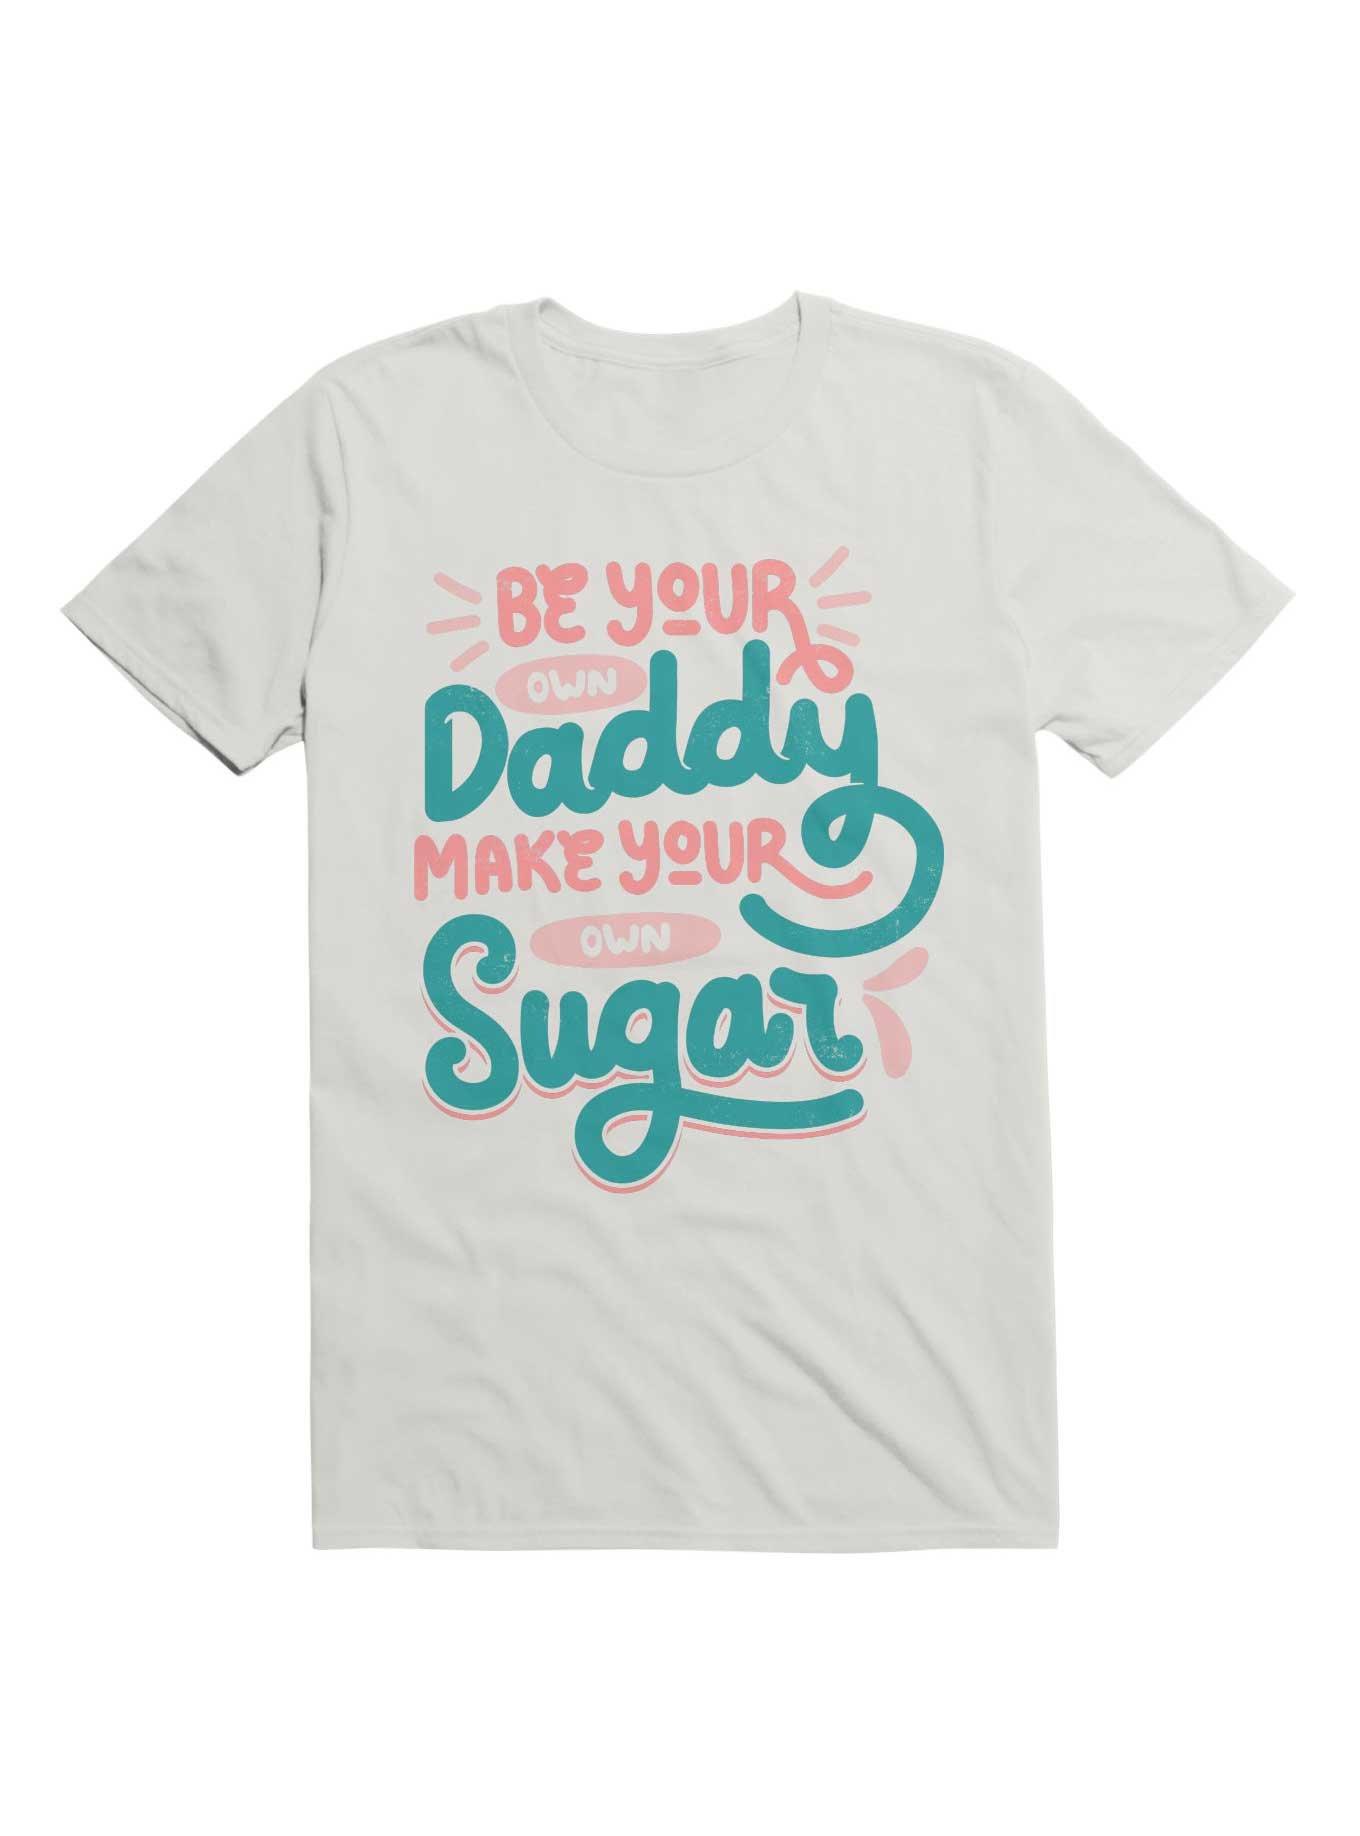 Be Your Own Daddy Make Your Own Sugar  Funny Tote Bag – Red Moon Creative  Co.